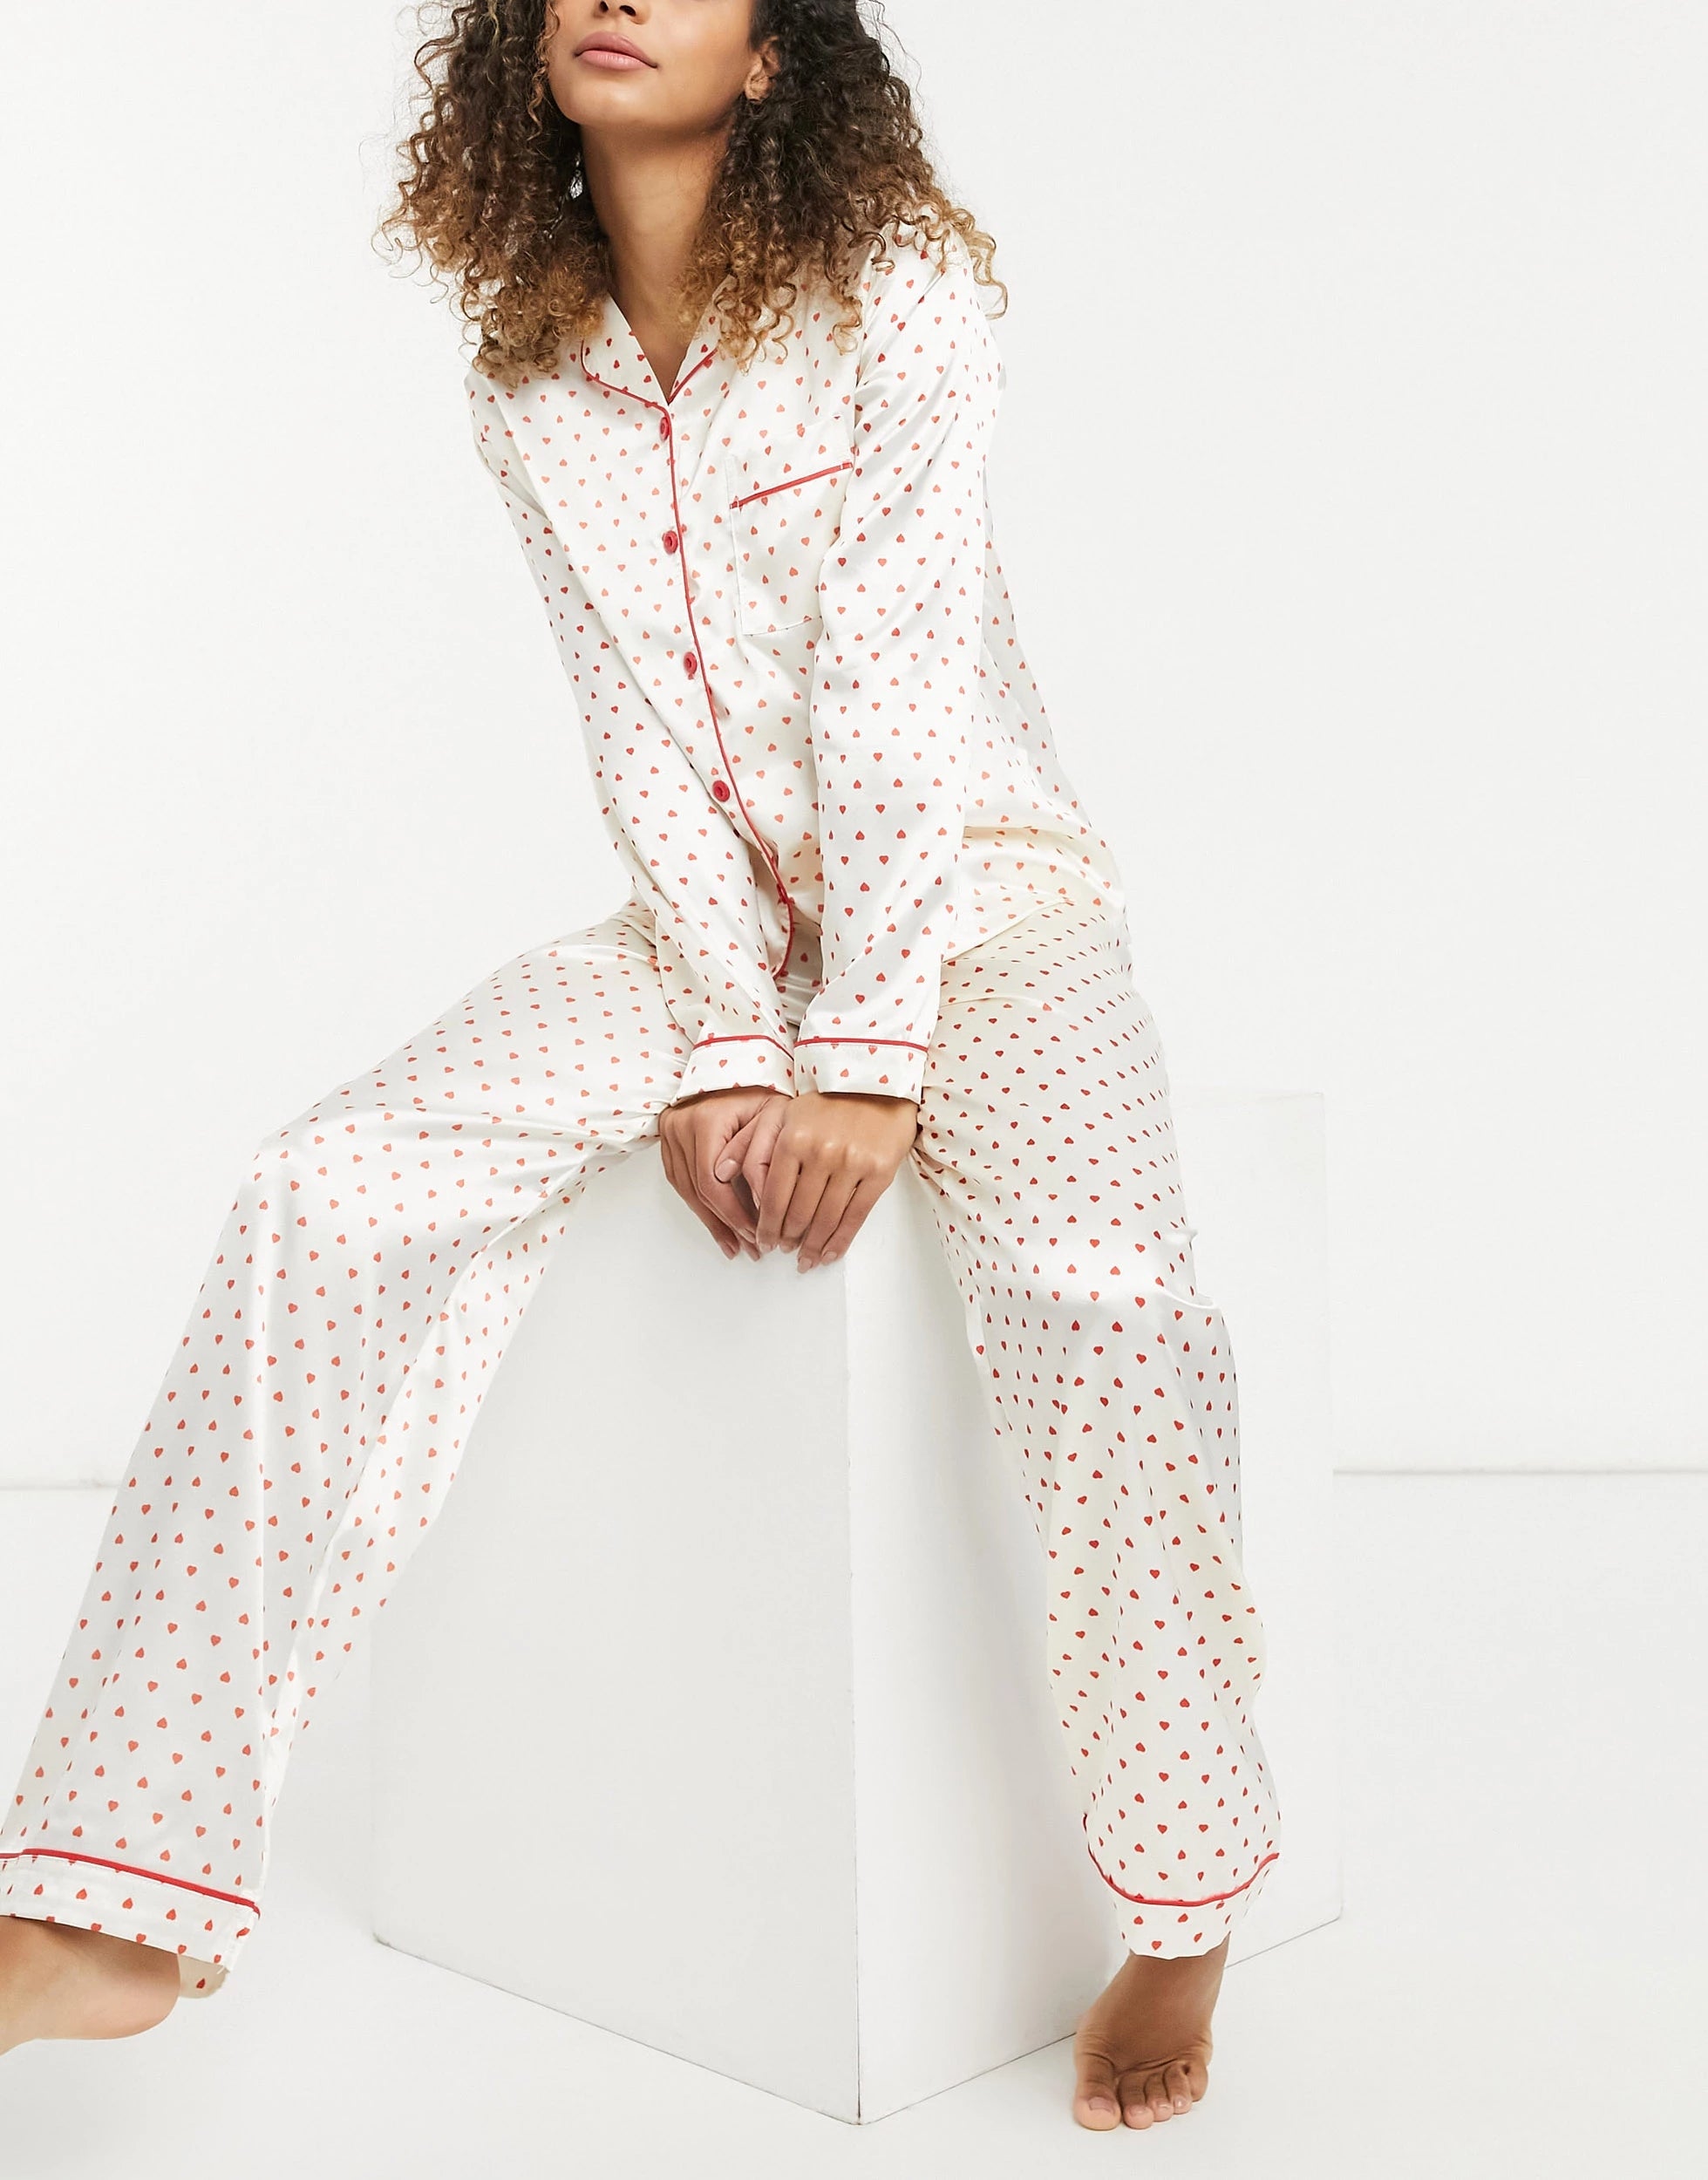 White Color Digital Abstract Printed loungewear/Nightsuit For Women With Pants.